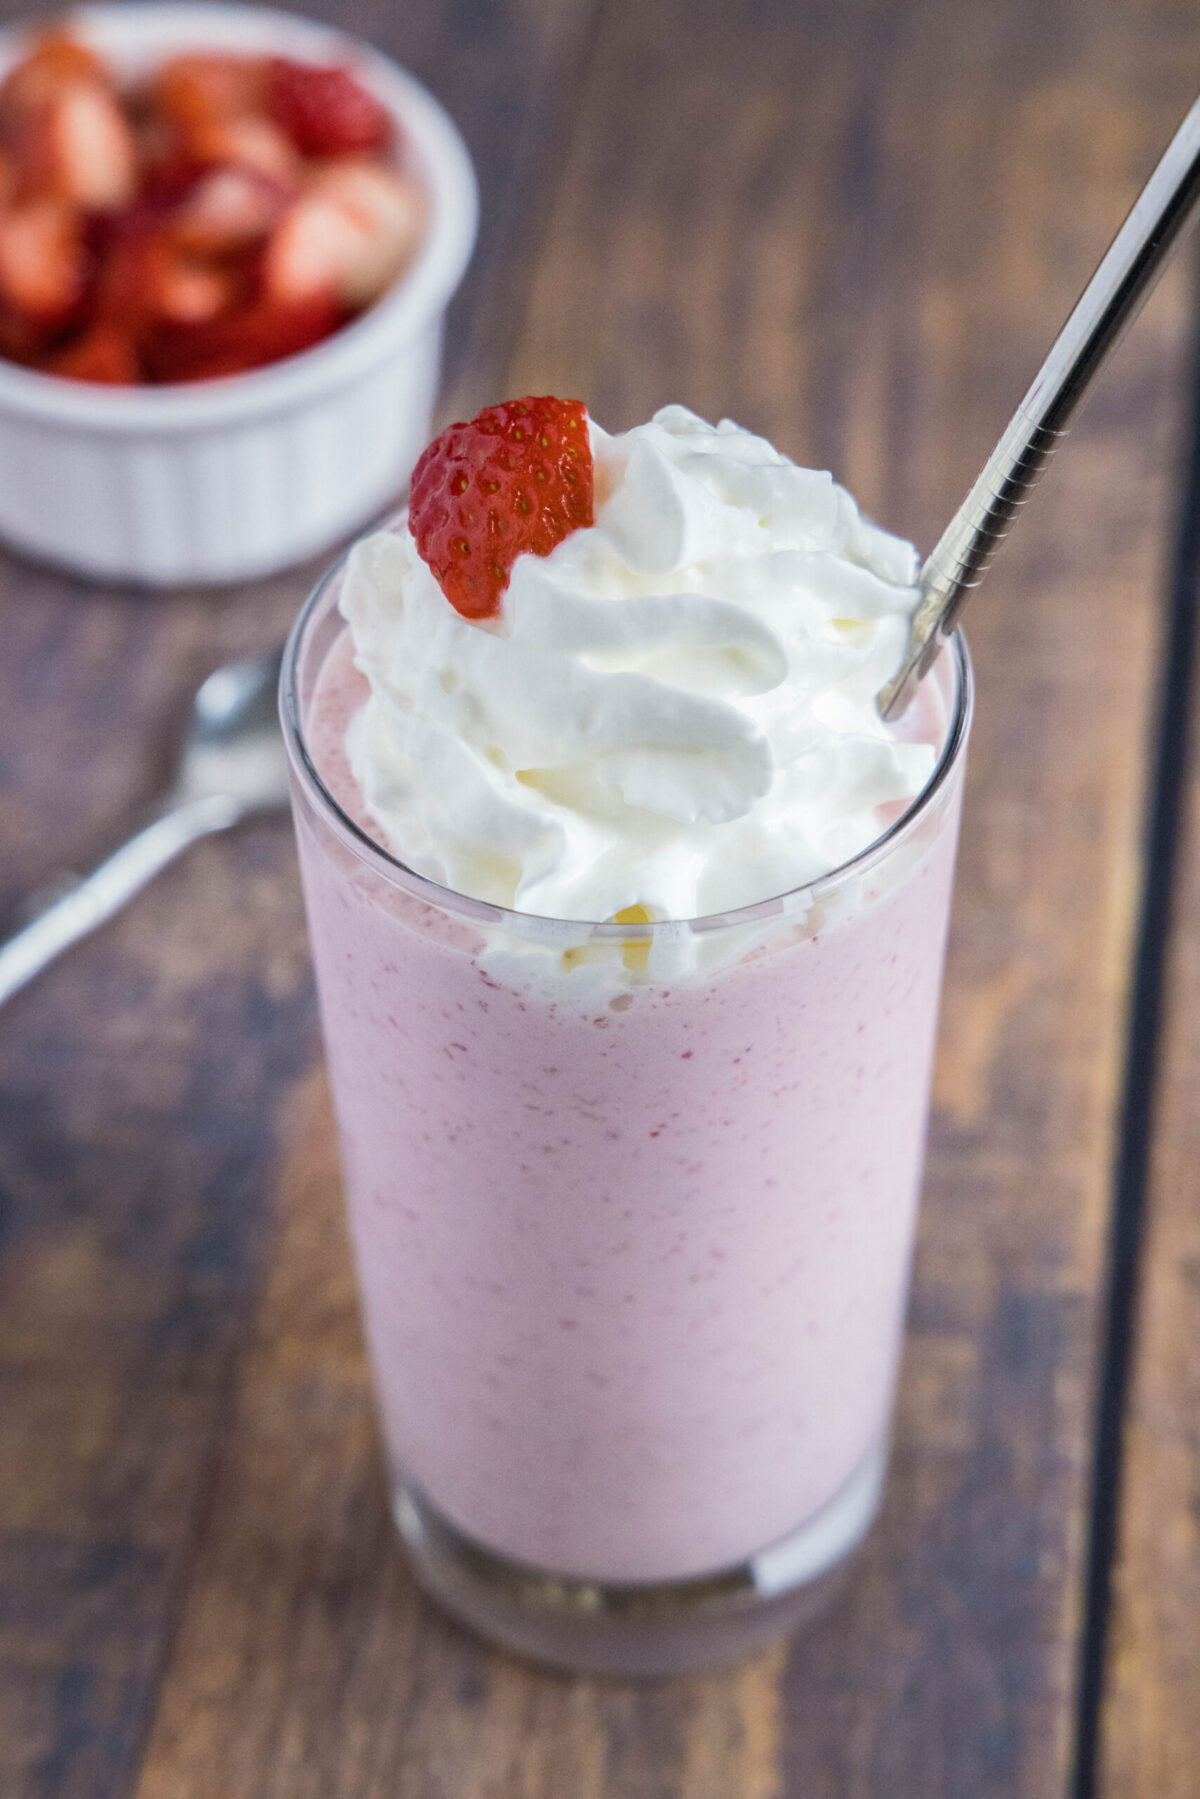 Overhead view of a strawberry milkshake with whipped cream, with a bowl of strowberries in the background.